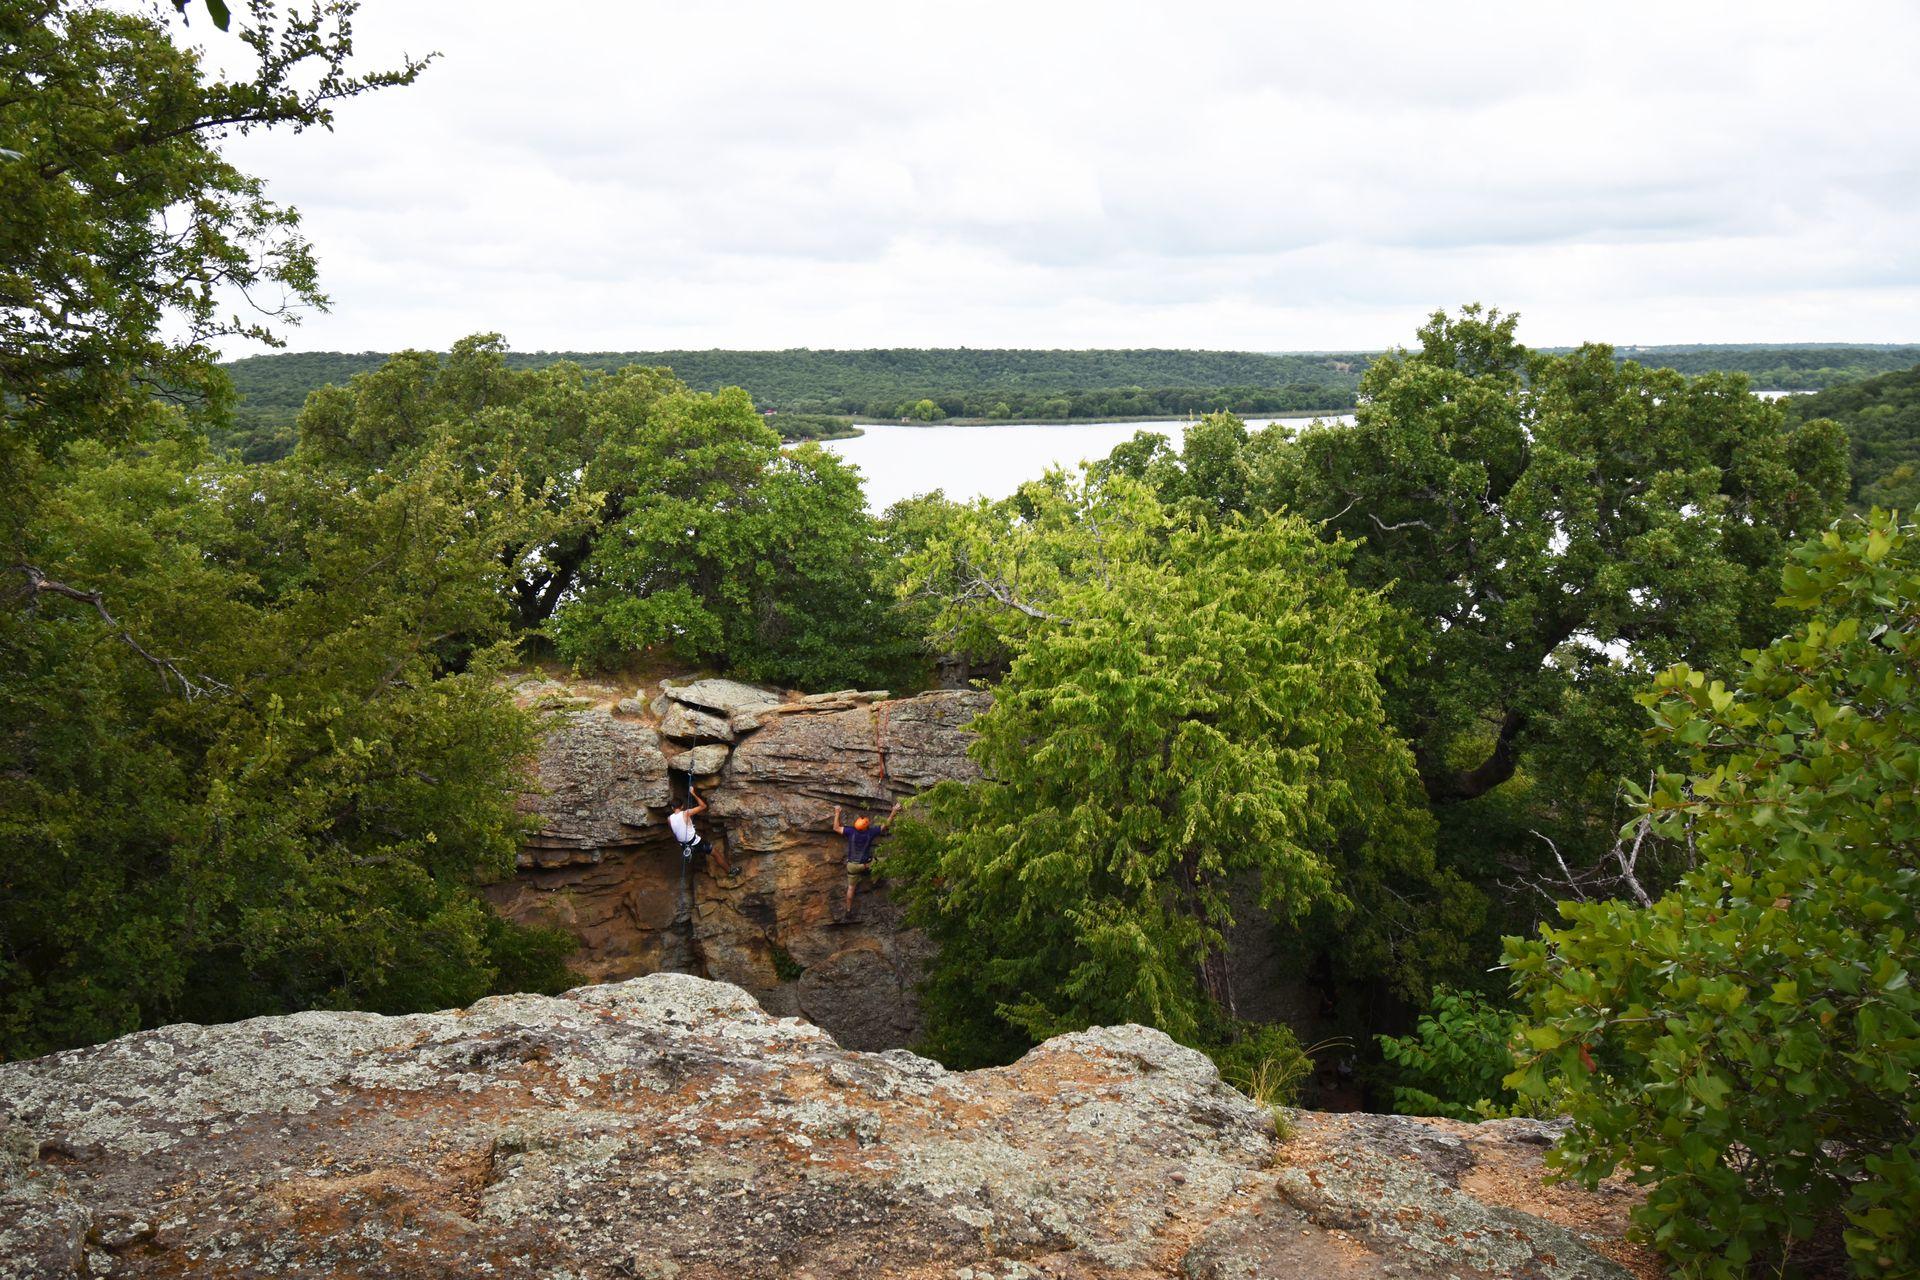 Some rock climbers on a rock wall at Lake Mineral Wells.